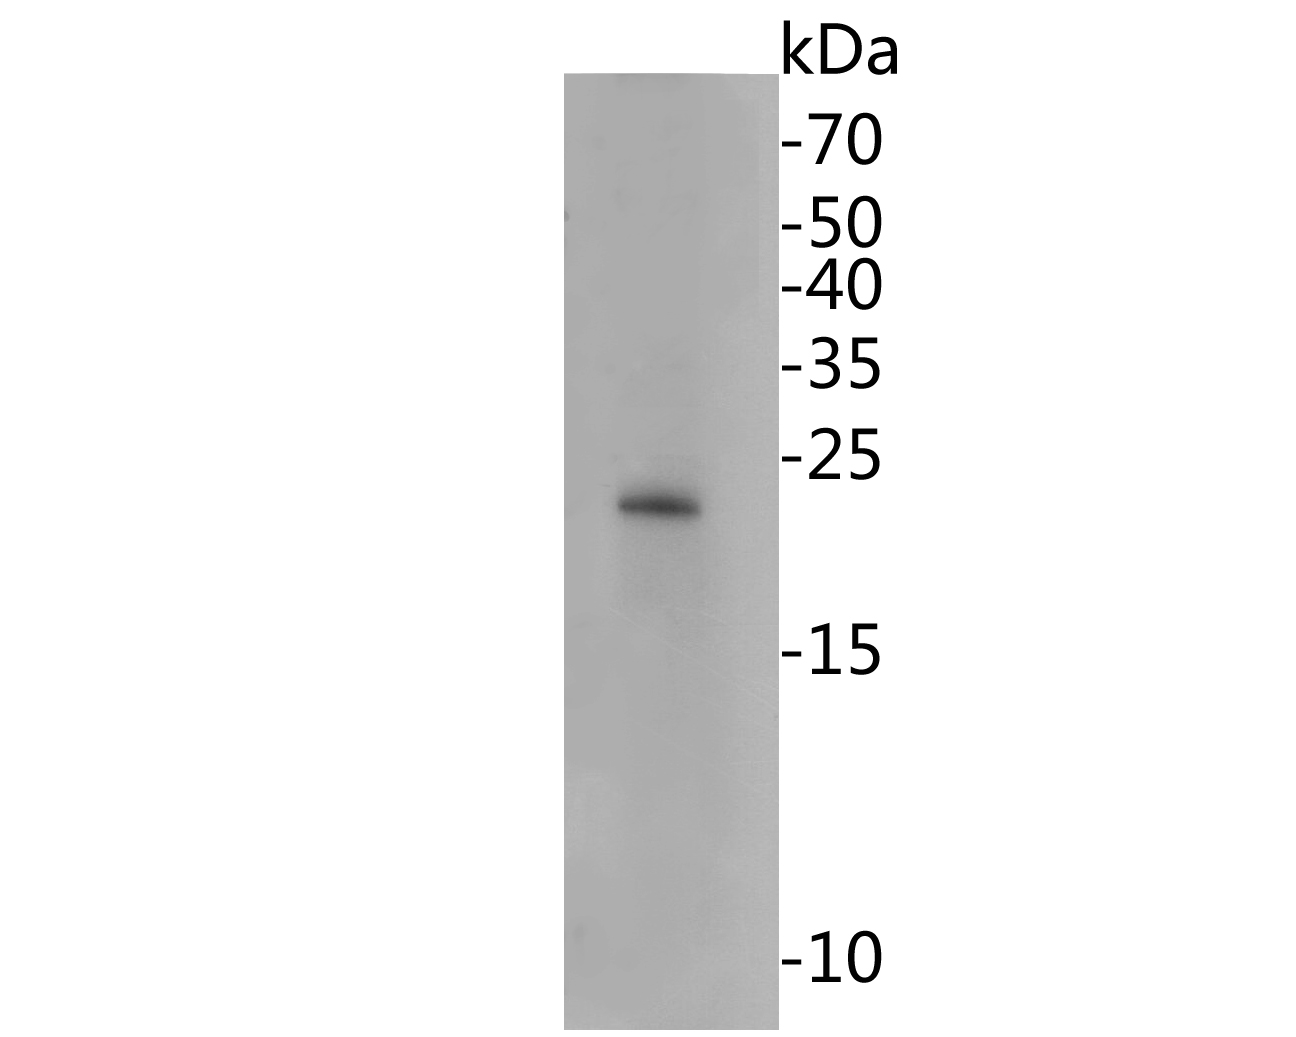 Western blot analysis of HMGB2 on Daudi cell lysates. Proteins were transferred to a PVDF membrane and blocked with 5% BSA in PBS for 1 hour at room temperature. The primary antibody (EM1902-06, 1/500) was used in 5% BSA at room temperature for 2 hours. Goat Anti-Mouse IgG - HRP Secondary Antibody (HA1006) at 1:5,000 dilution was used for 1 hour at room temperature.